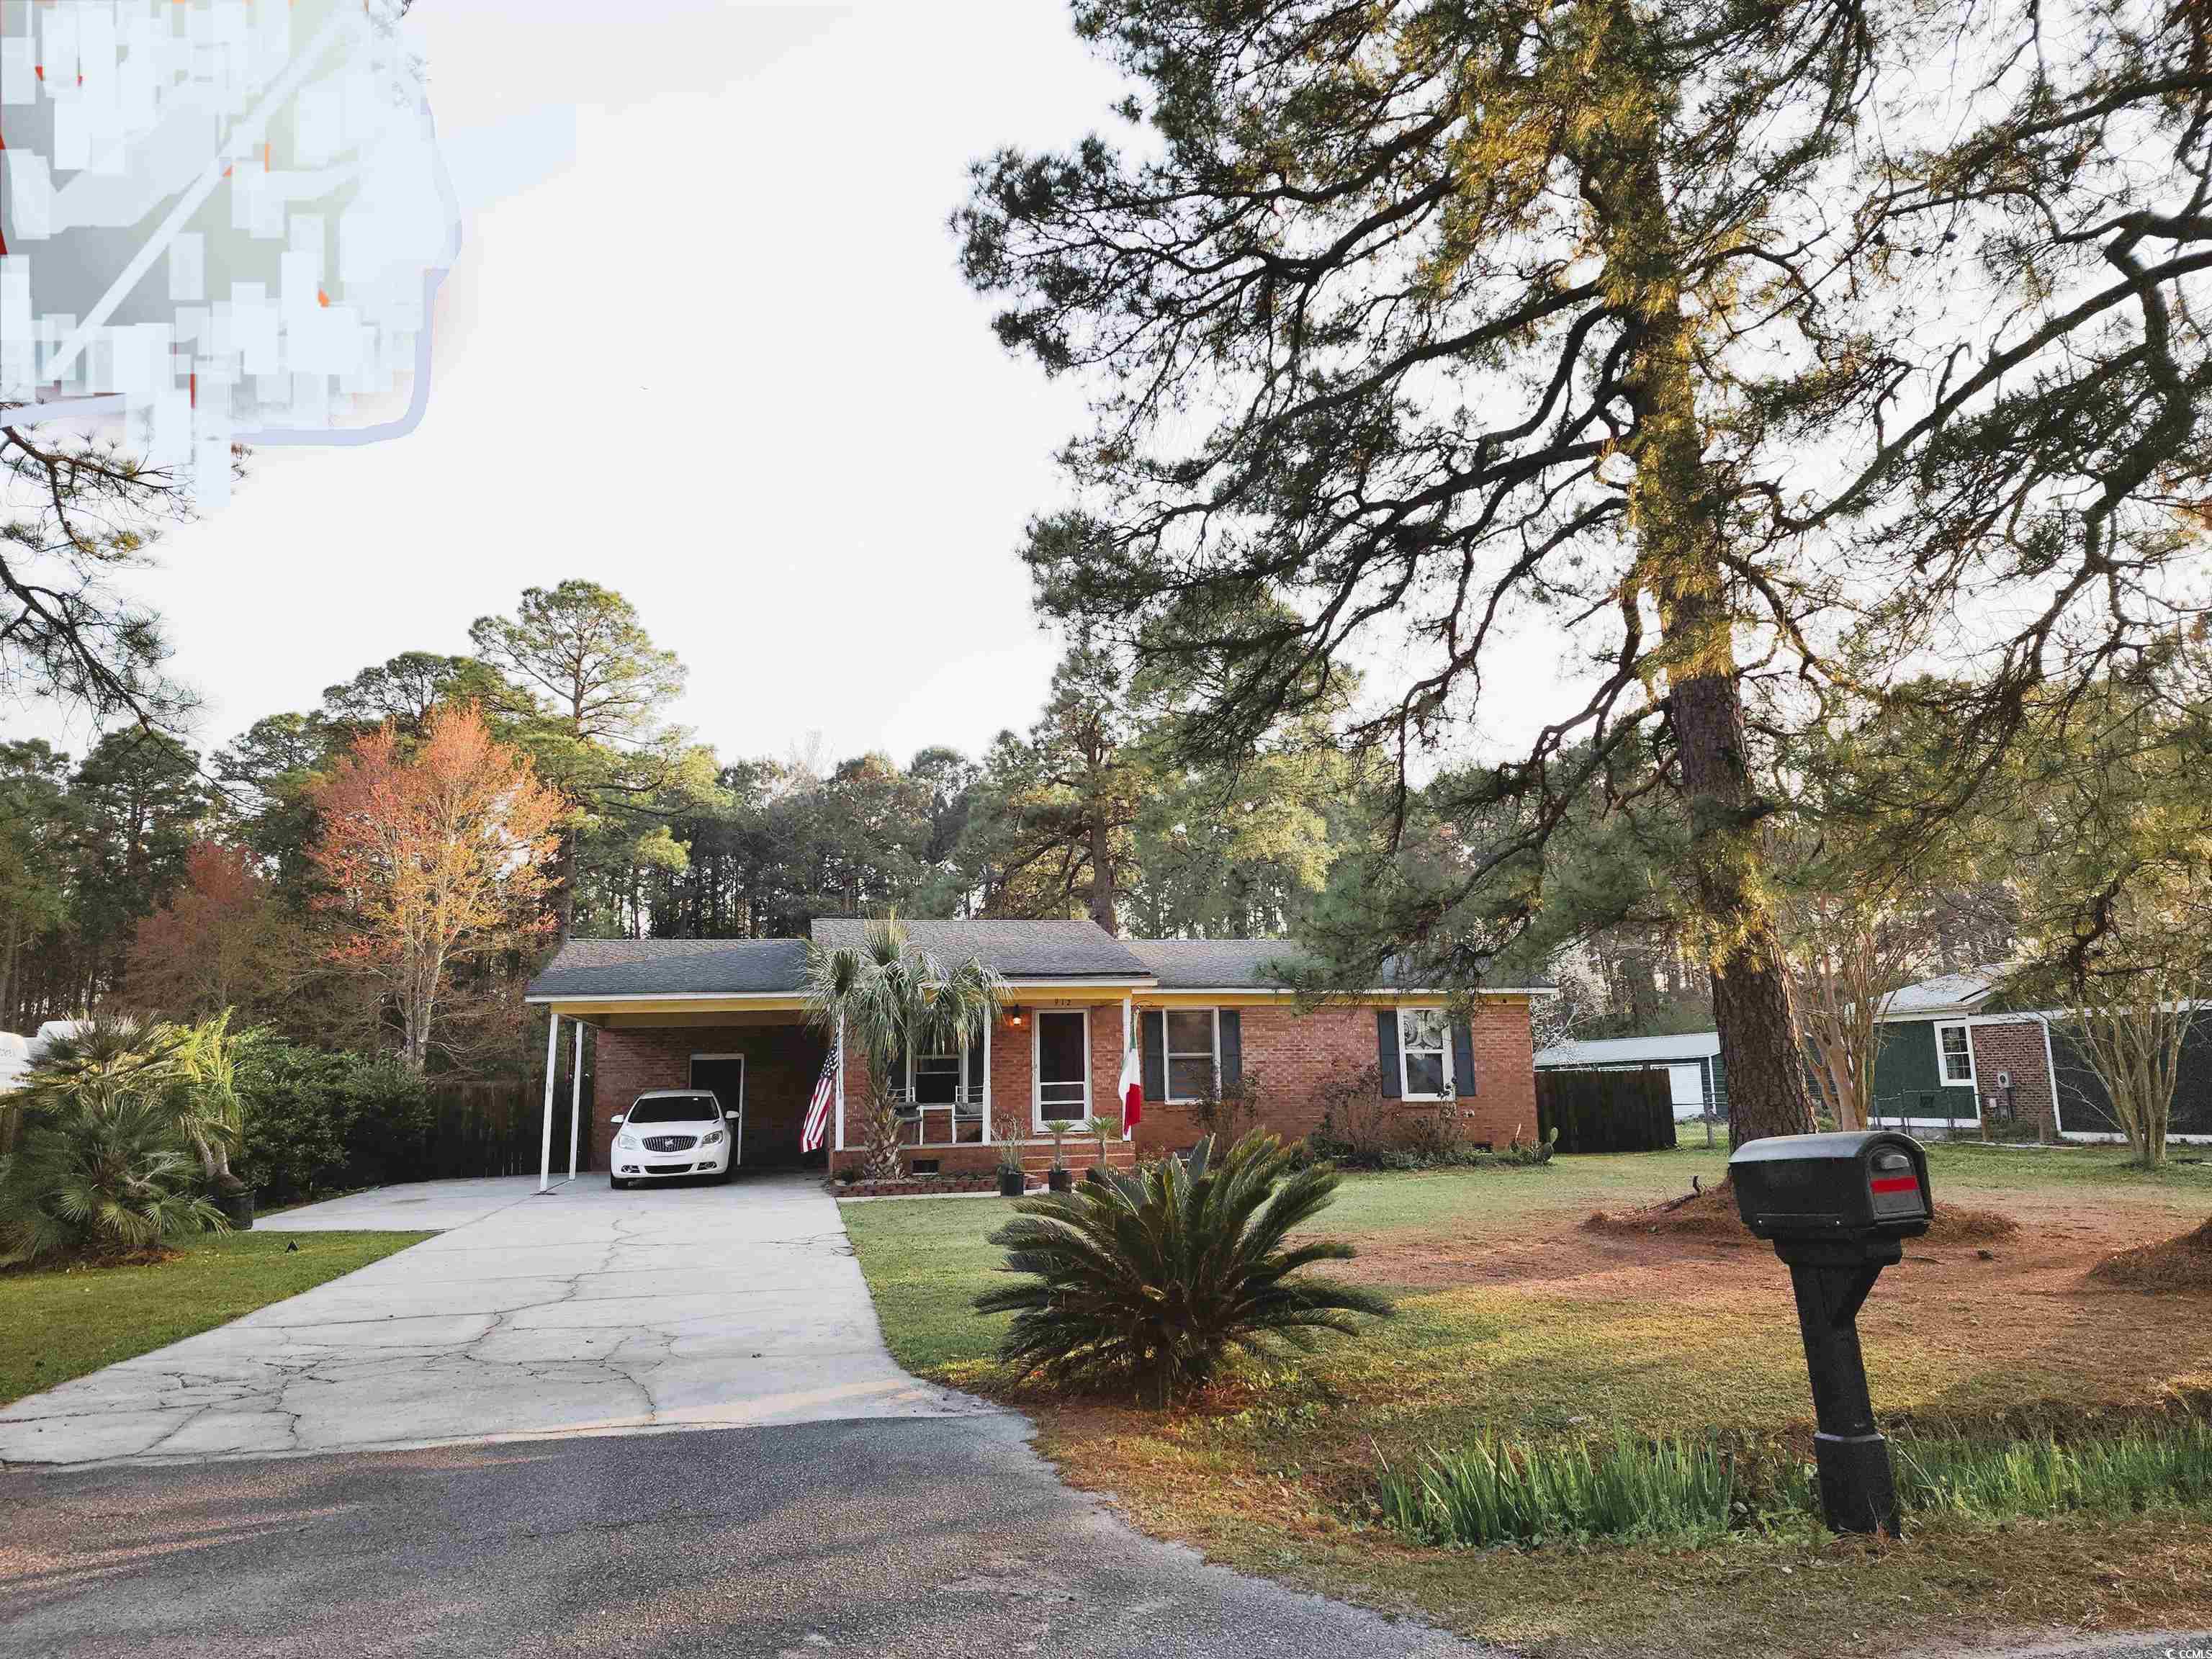 an original all brick southern ranch home built in the 70's. this 3 bed 1 bath home is move in ready with tropical plantings lit up at night, truly a must see. this home has no hoa it is not in a flood zone, over 1/2 acre of fenced in back yard ready for your pups. with a shed, rv/boat pad and parking for 6 cars. all appliances stay. and, just installed a new hvac. roof and hot water tank almost new. the home is on a cul-de-sac close the conway medical center and coastal carolina university. close to the beach/shops and dining. in the evening turn on the landscape lighting  and sit on the porch under the palm. don't miss out on this home it will not last long at this price. truly a must see.